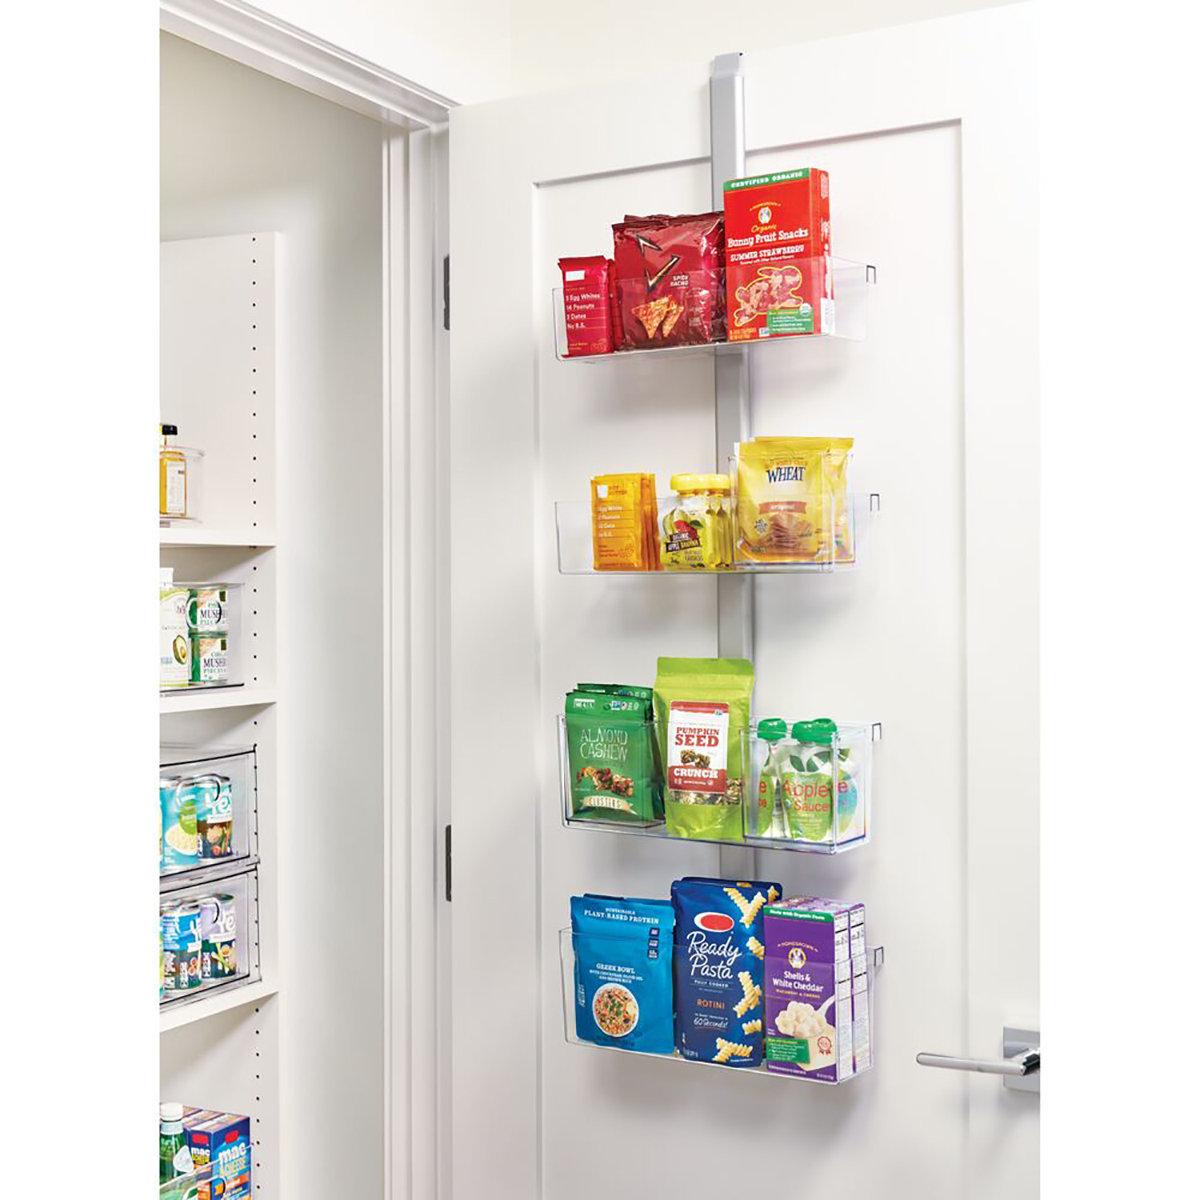 Organize with Over the Door Storage - So Easy! - Jennifer Maker